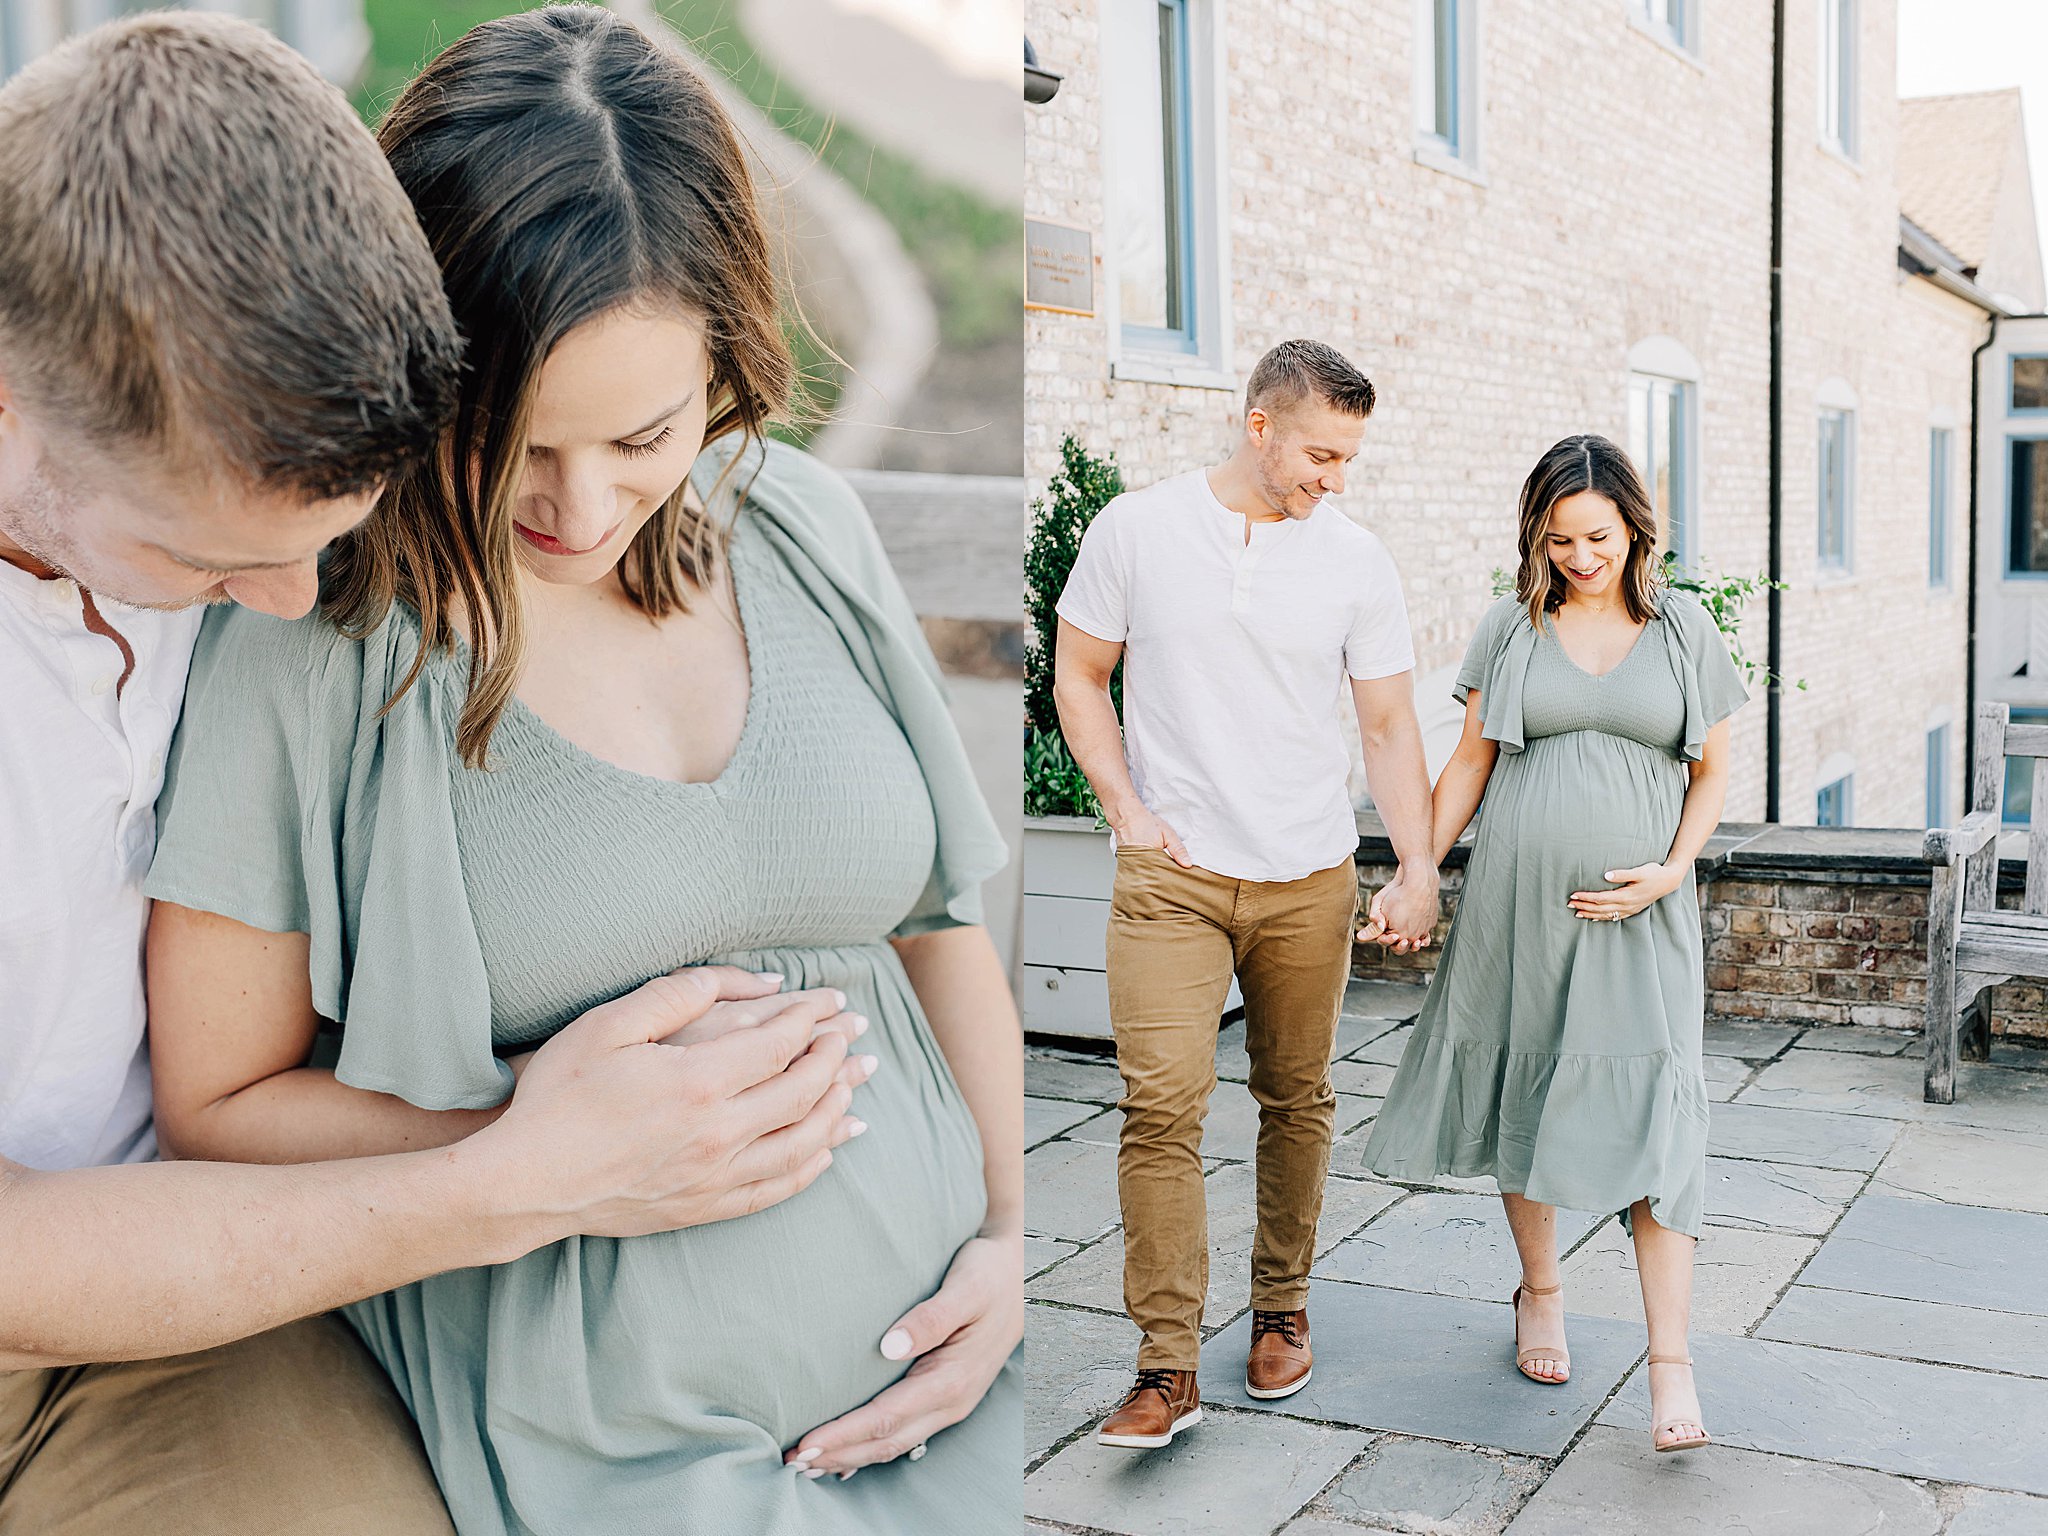 Dad touching mom's baby bump during maternity photos